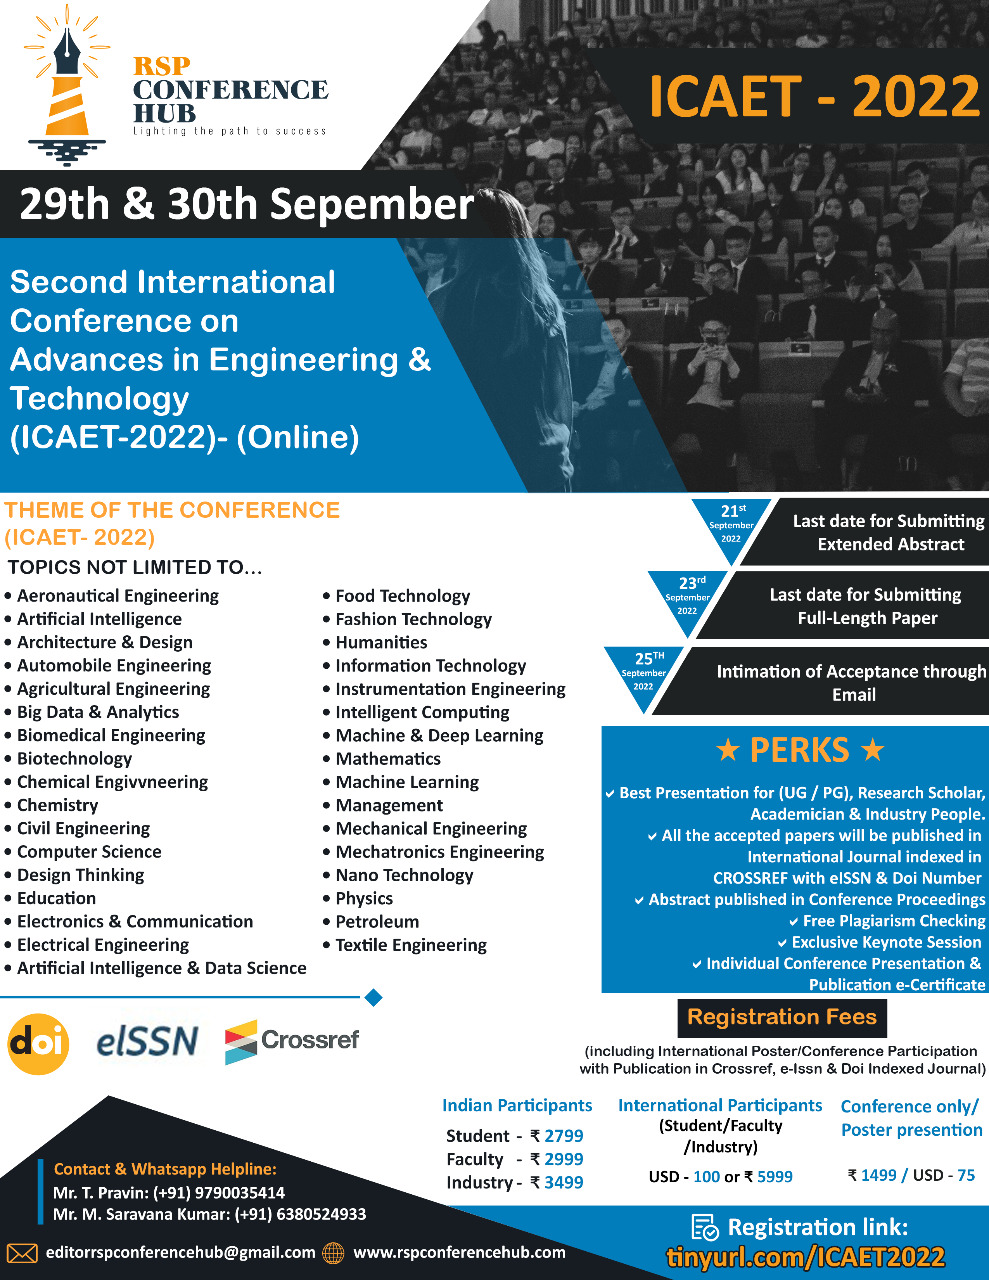 Second International Conference on Advances in Engineering and Technology IInd ICAET 2022